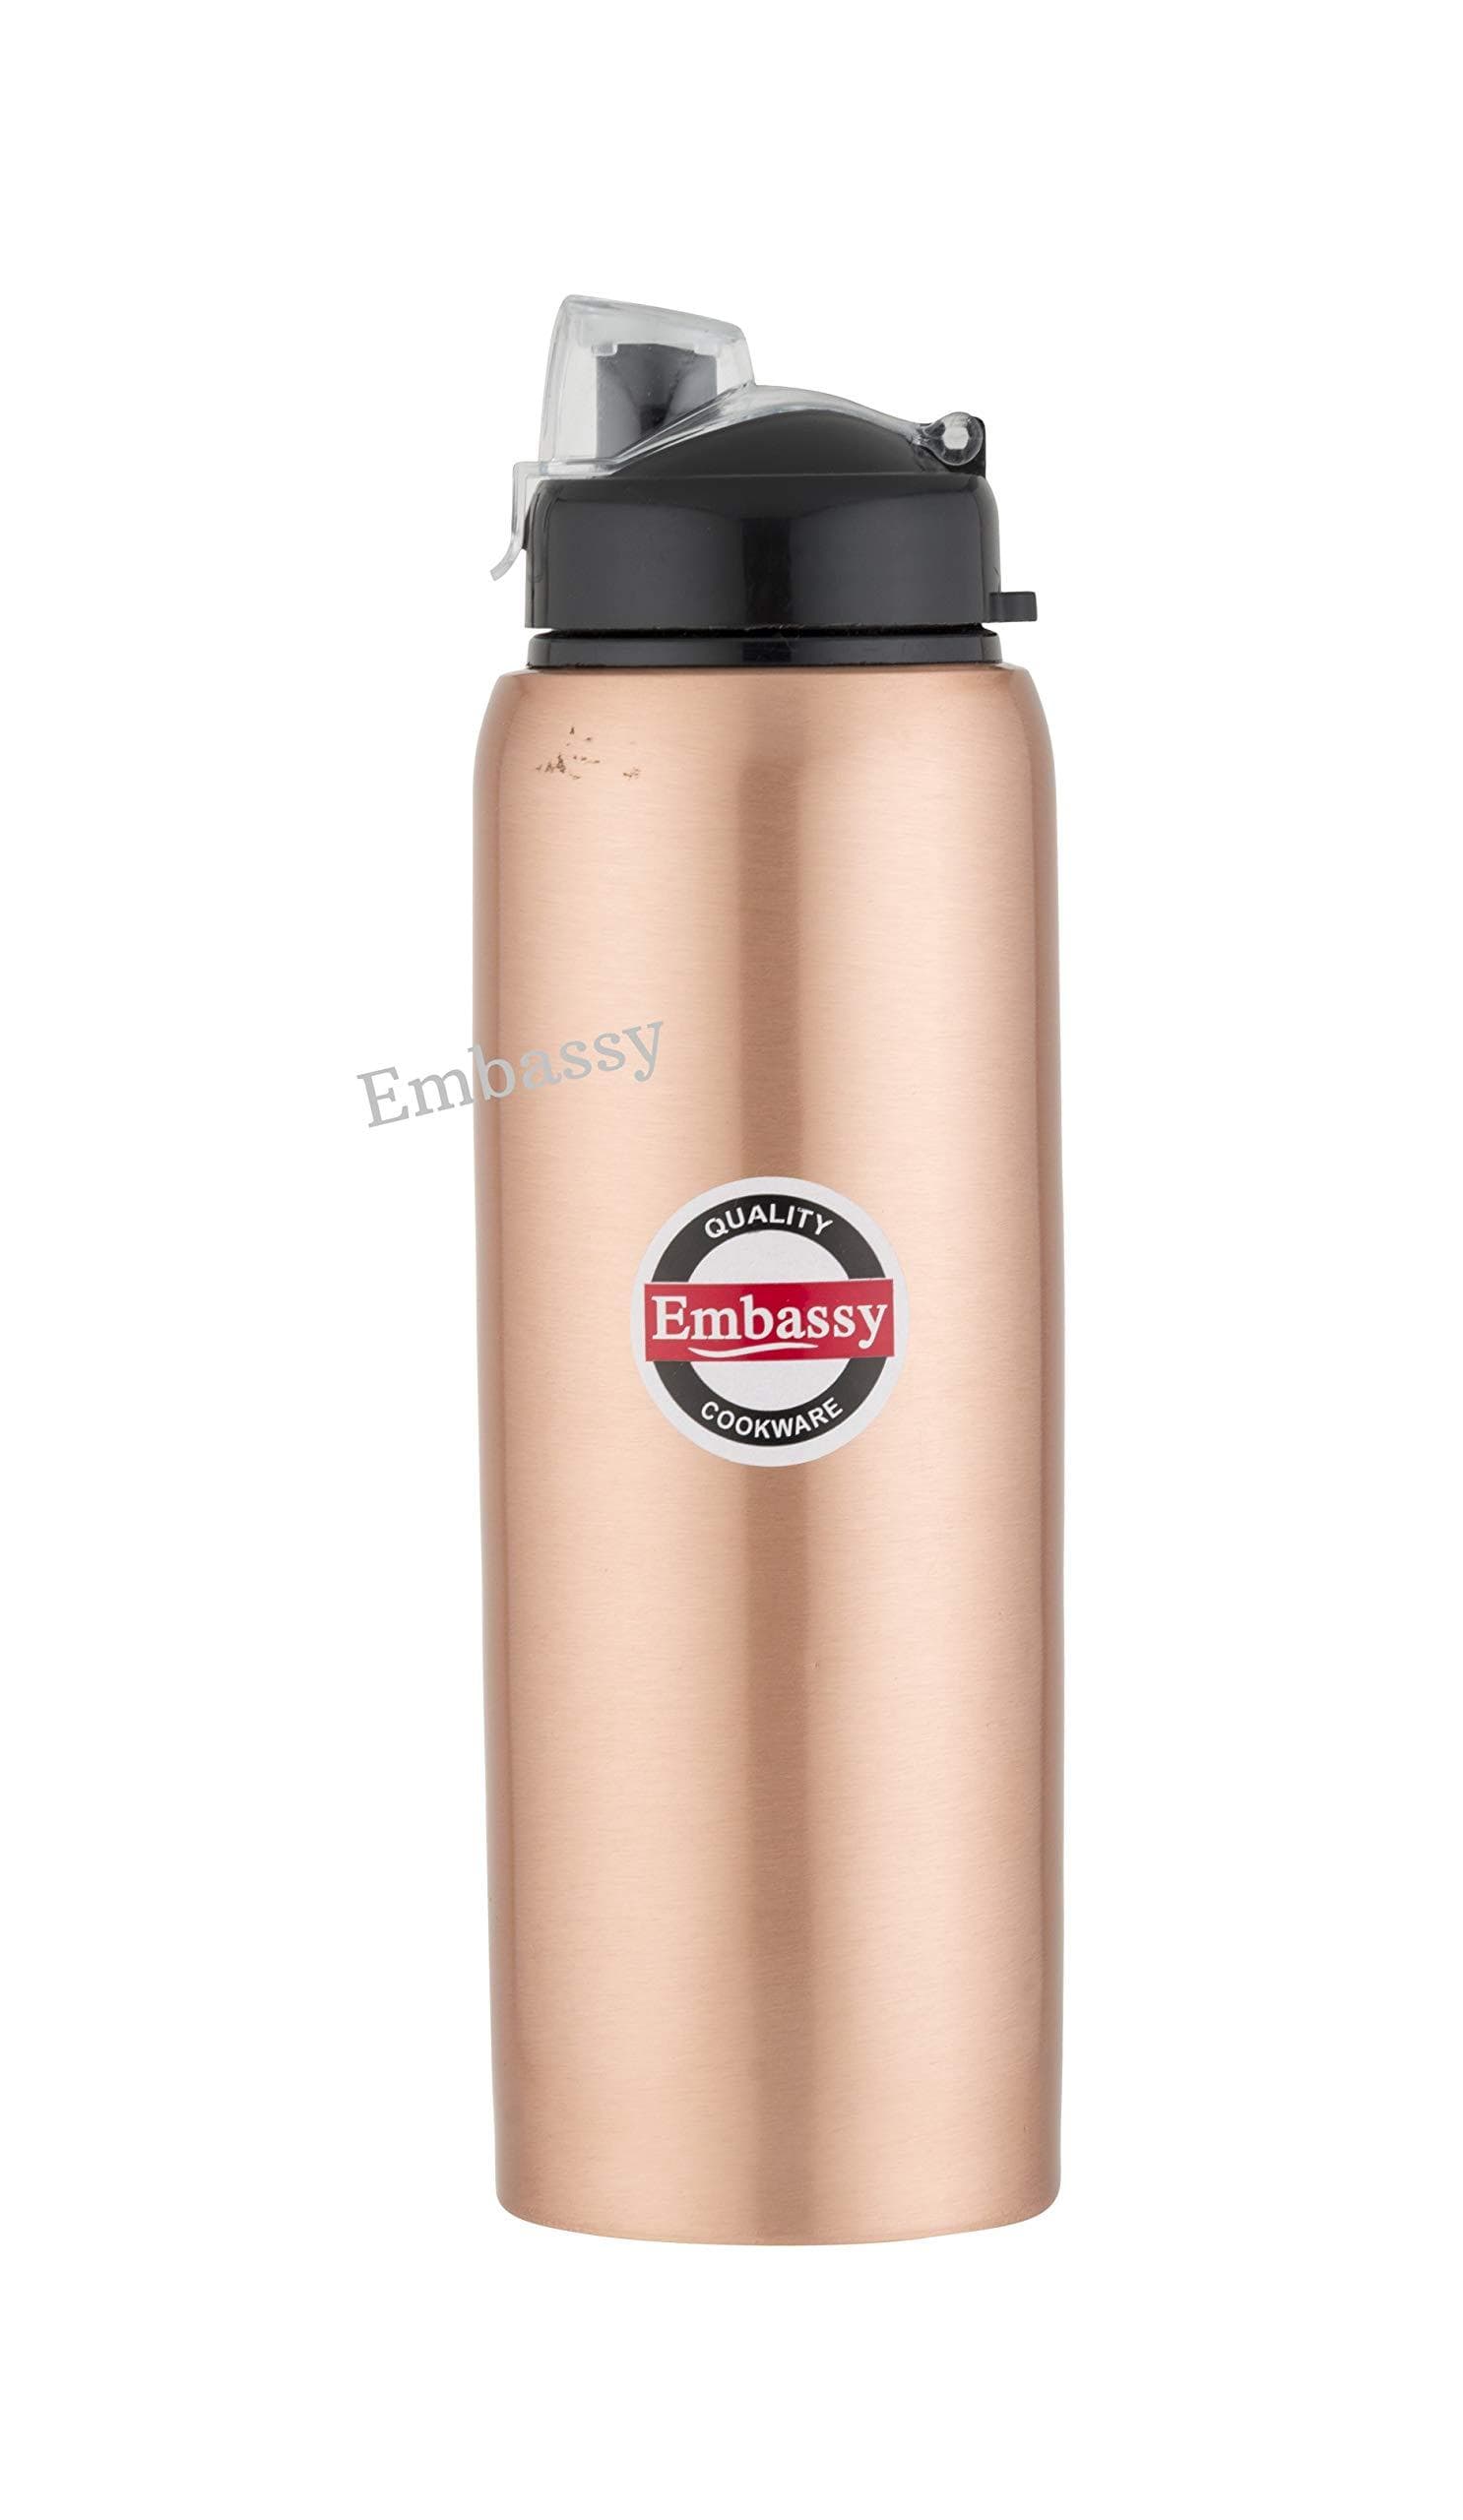 Embassy Premium Copper Water Bottle, Sipper, 600 ml, Pack of 1 - Leak-Proof, Jointless and Pure Copper - KITCHEN MART